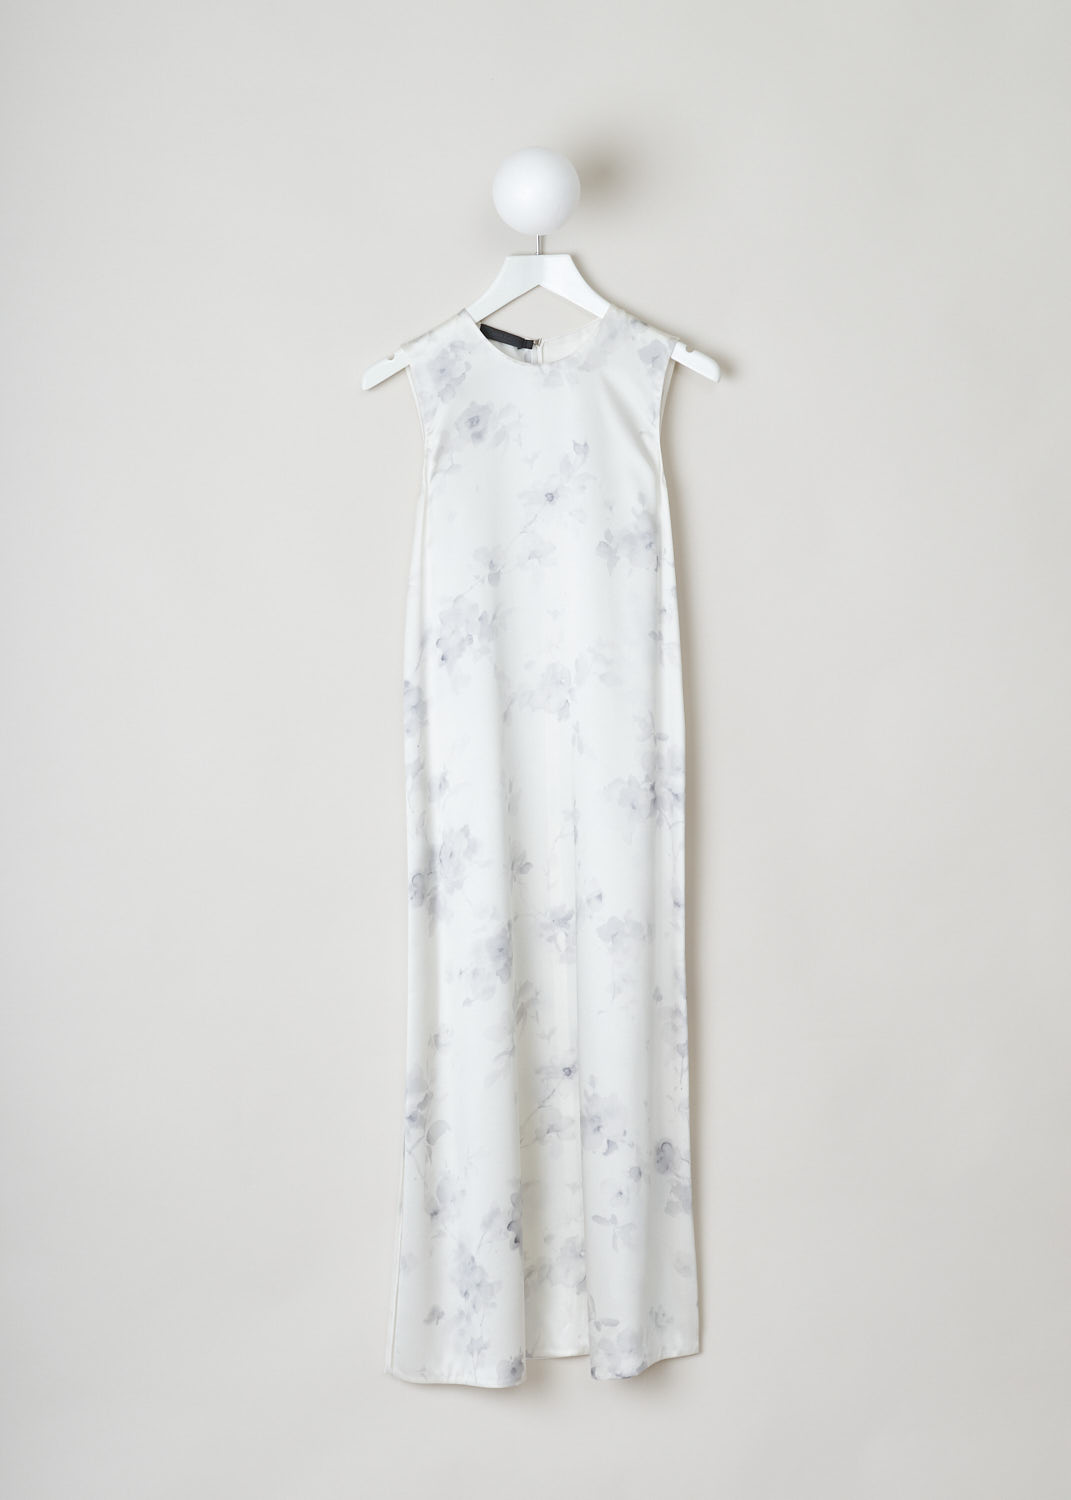 Calvin Klein 205w39nyc, White shift dress with a grey floral pattern, W72D10_WS037_983, white grey, front, Lovely dress crafted out of a soft silk fabric that follows the body curves. This sleeveless dress has a round neckline and a split at the side. Furthermore, a metal clip on the back acts as your fastening option on  this model.